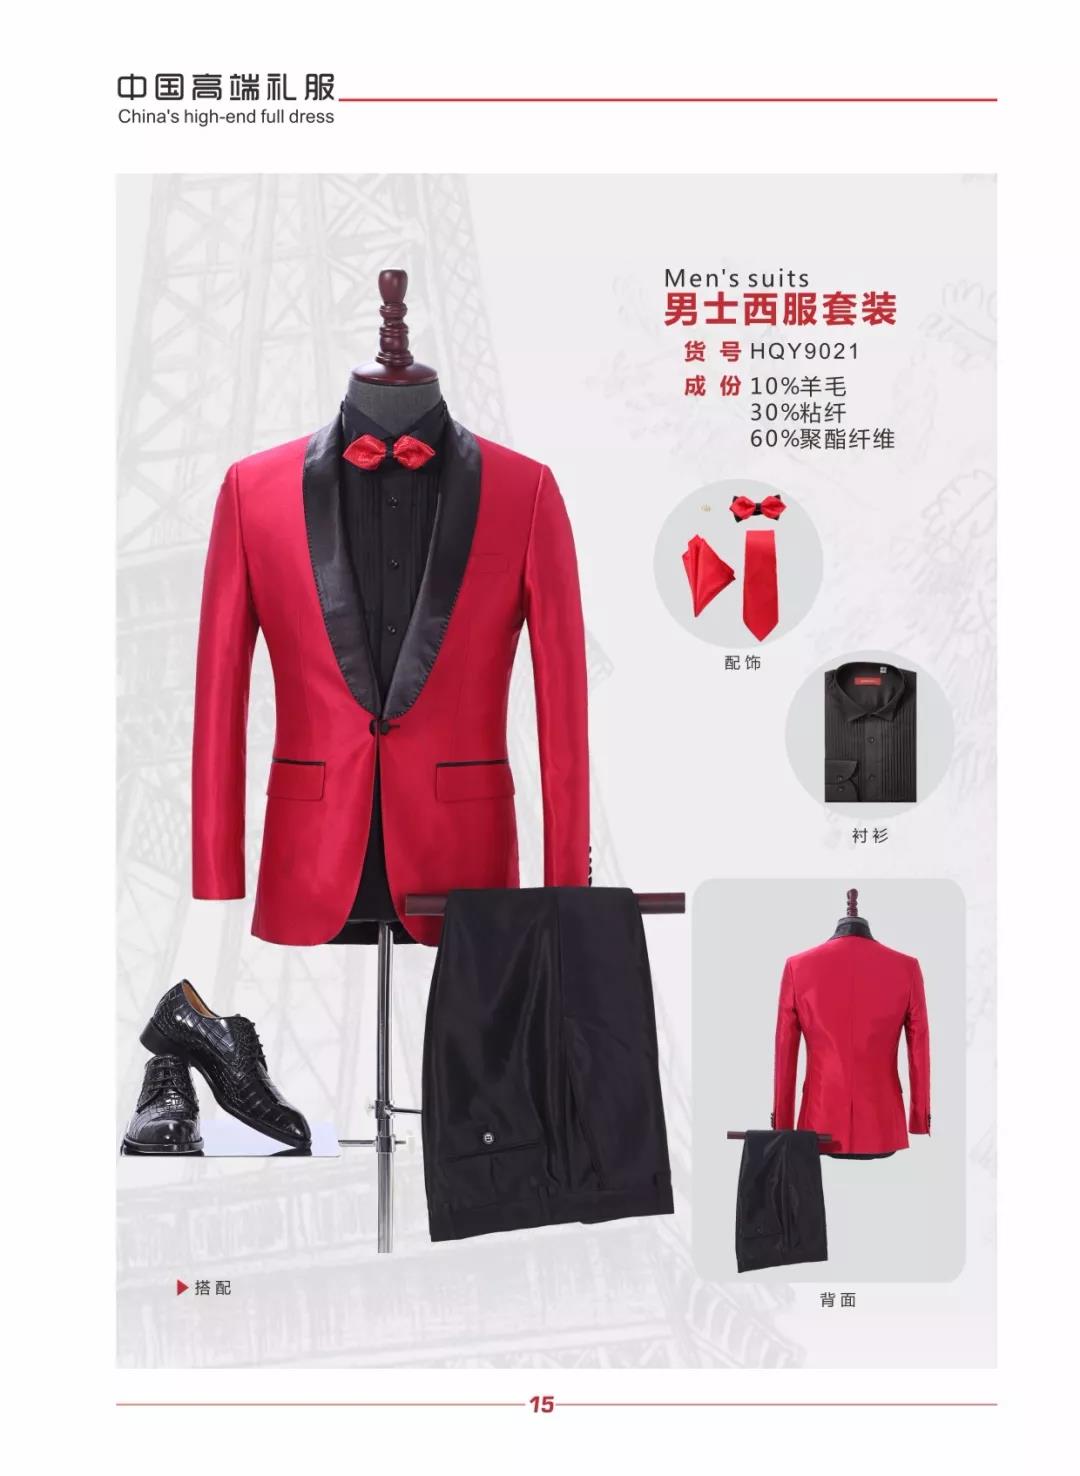 Black mens suit with red stitching